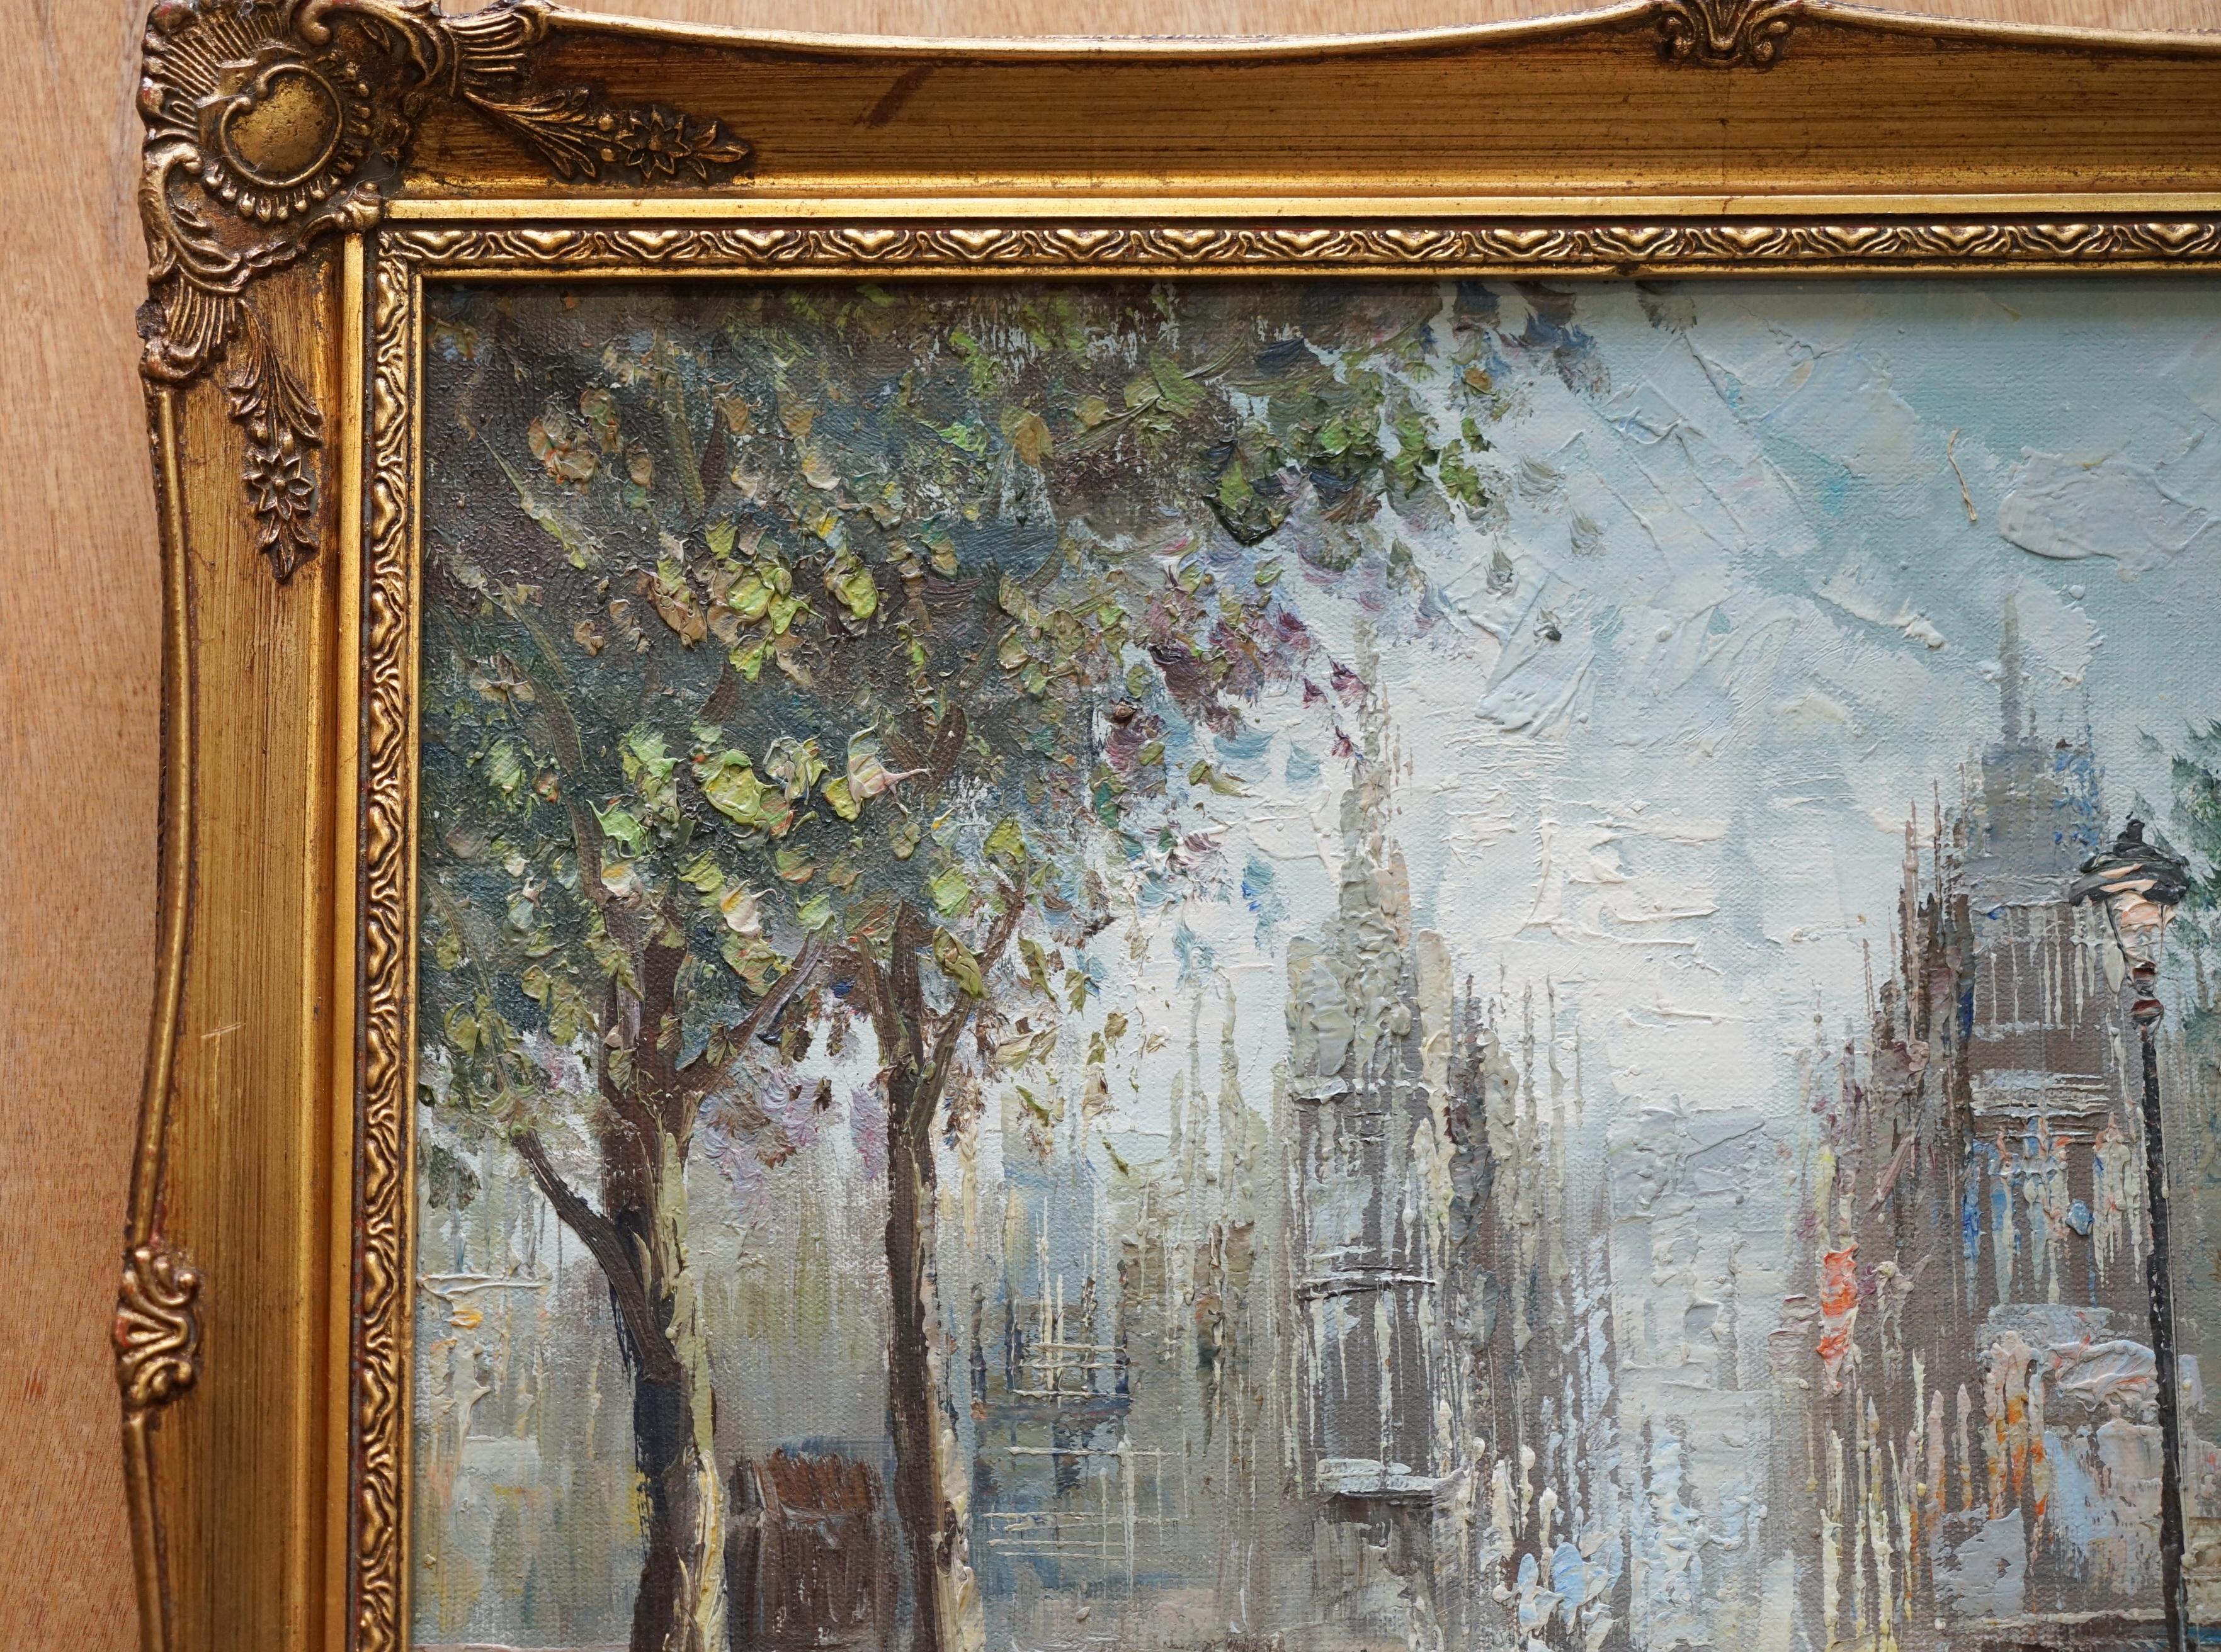 We are delighted to offer this lovely French Parisian street scene oil painting signed Pierre

This painting is one of a pair, the other is by the same artist of Arc De Triomphe. Both have wonderful movement, they look to be a window into the